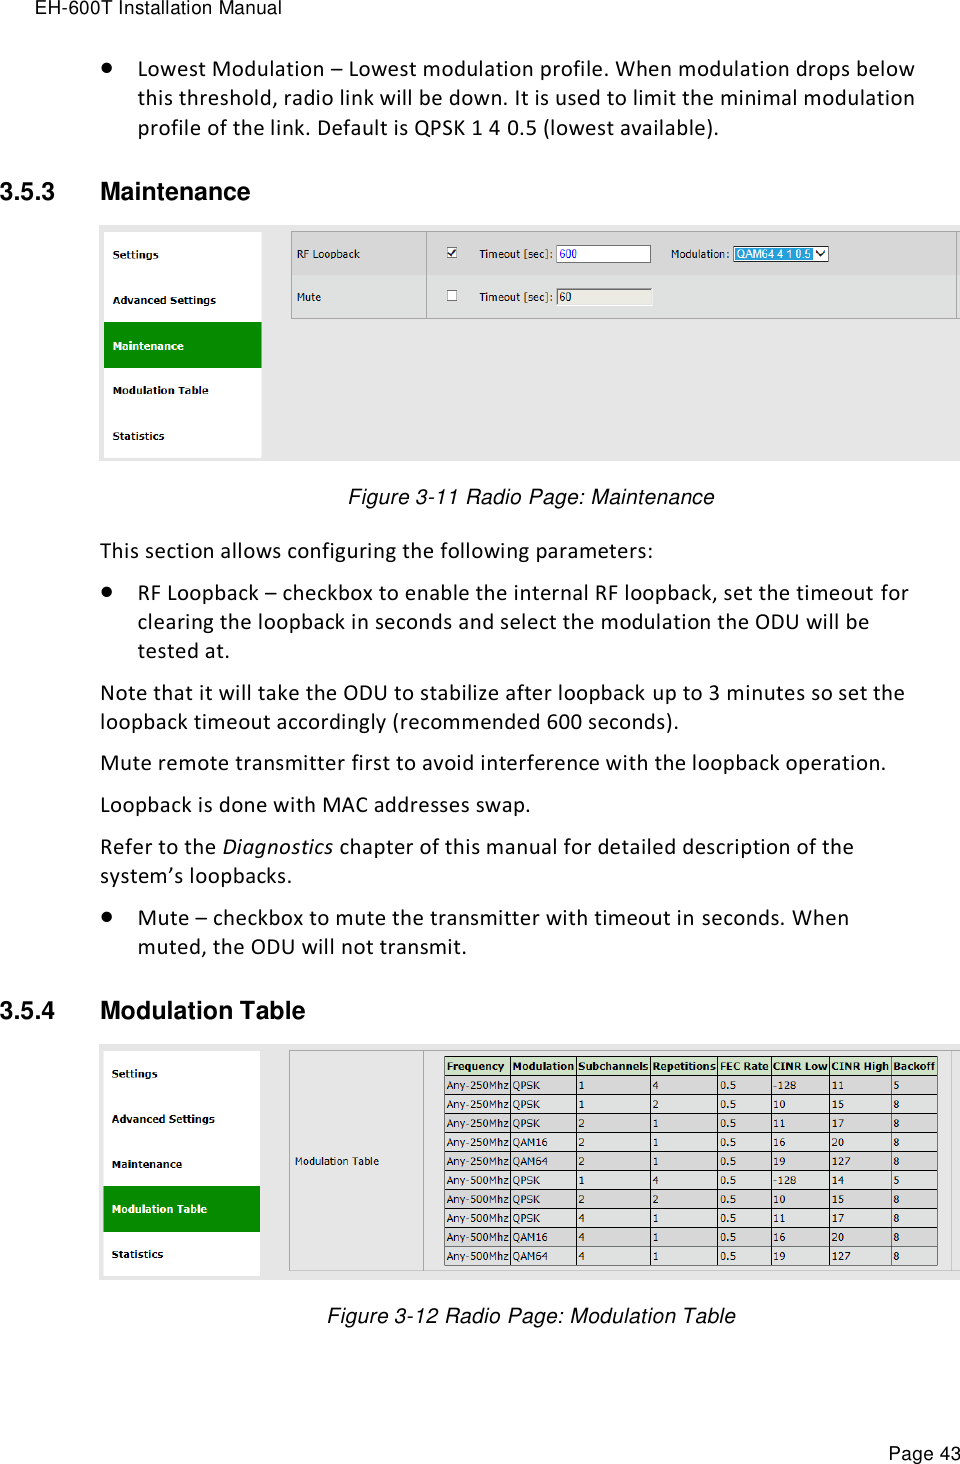 EH-600T Installation Manual Page 43  Lowest Modulation – Lowest modulation profile. When modulation drops below this threshold, radio link will be down. It is used to limit the minimal modulation profile of the link. Default is QPSK 1 4 0.5 (lowest available). 3.5.3  Maintenance   Figure 3-11 Radio Page: Maintenance This section allows configuring the following parameters:  RF Loopback – checkbox to enable the internal RF loopback, set the timeout for clearing the loopback in seconds and select the modulation the ODU will be tested at. Note that it will take the ODU to stabilize after loopback up to 3 minutes so set the loopback timeout accordingly (recommended 600 seconds). Mute remote transmitter first to avoid interference with the loopback operation. Loopback is done with MAC addresses swap. Refer to the Diagnostics chapter of this manual for detailed description of the system’s loopbacks.  Mute – checkbox to mute the transmitter with timeout in seconds. When muted, the ODU will not transmit. 3.5.4  Modulation Table   Figure 3-12 Radio Page: Modulation Table 